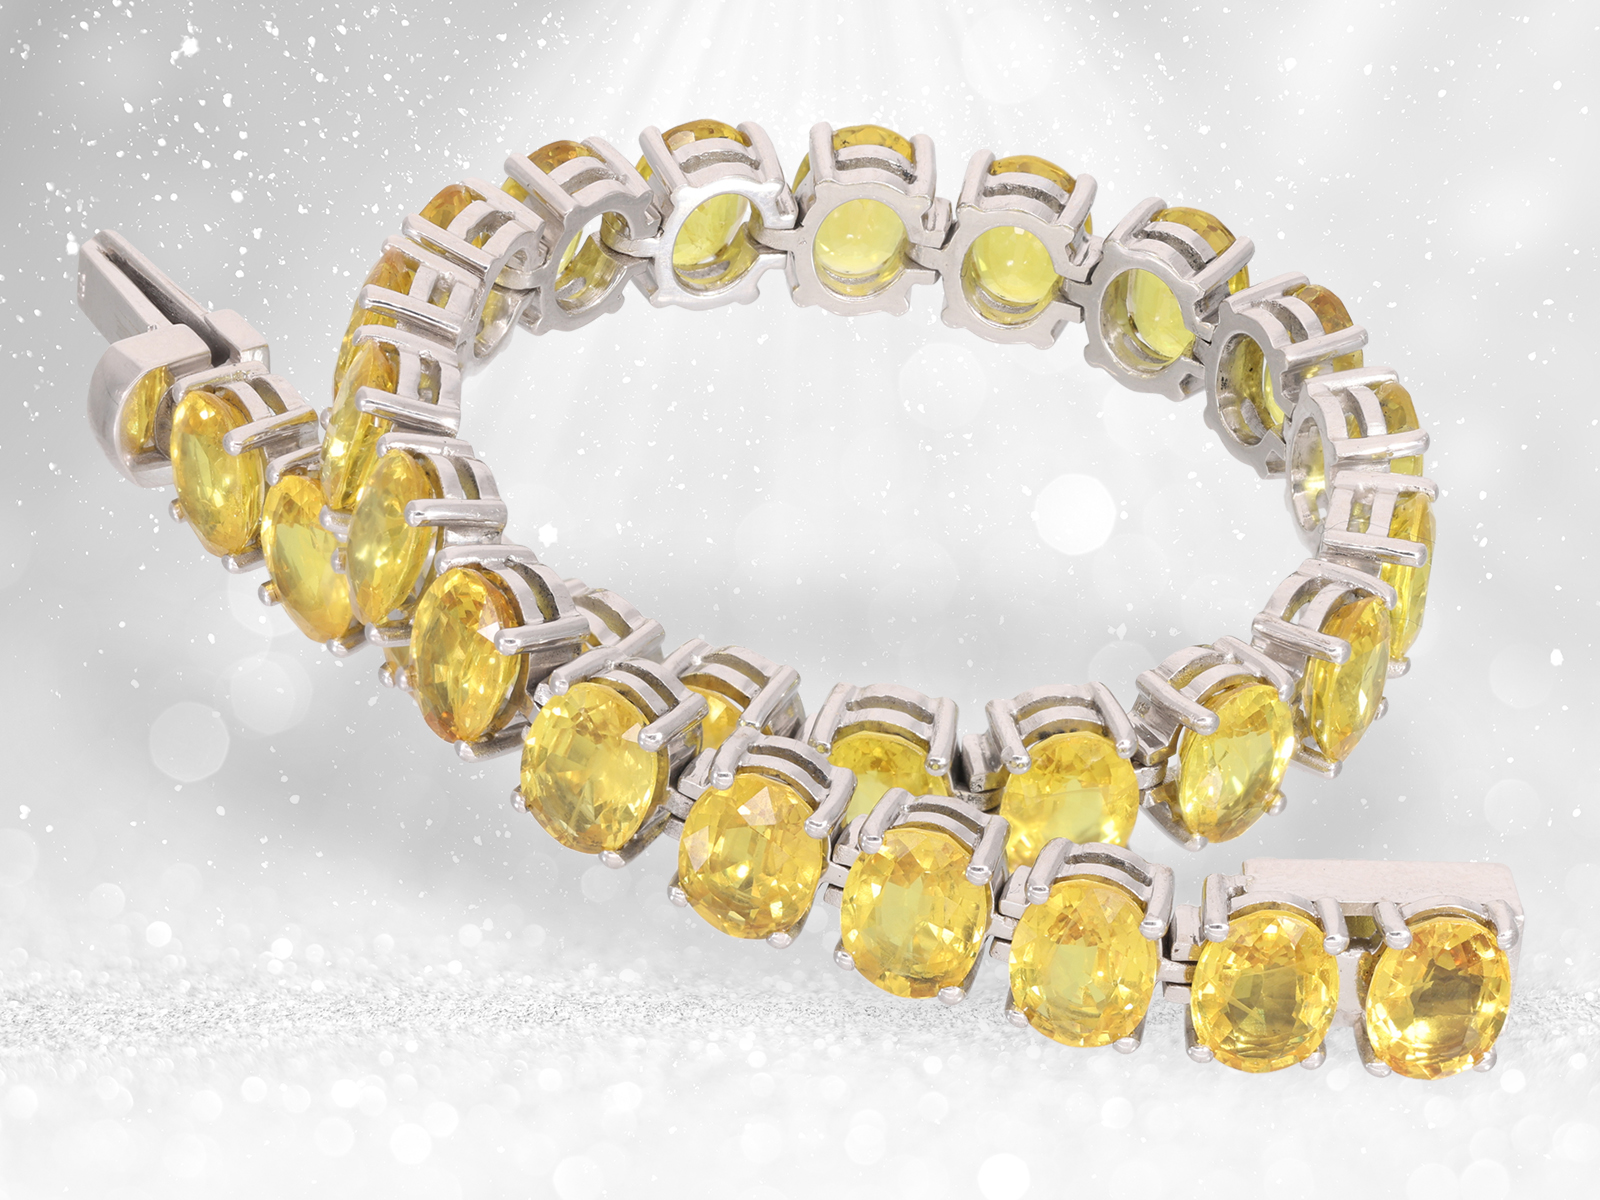 Modern 18K goldsmith's bracelet with yellow sapphires totalling approx. 42ct, valuable handwork by S - Image 3 of 4